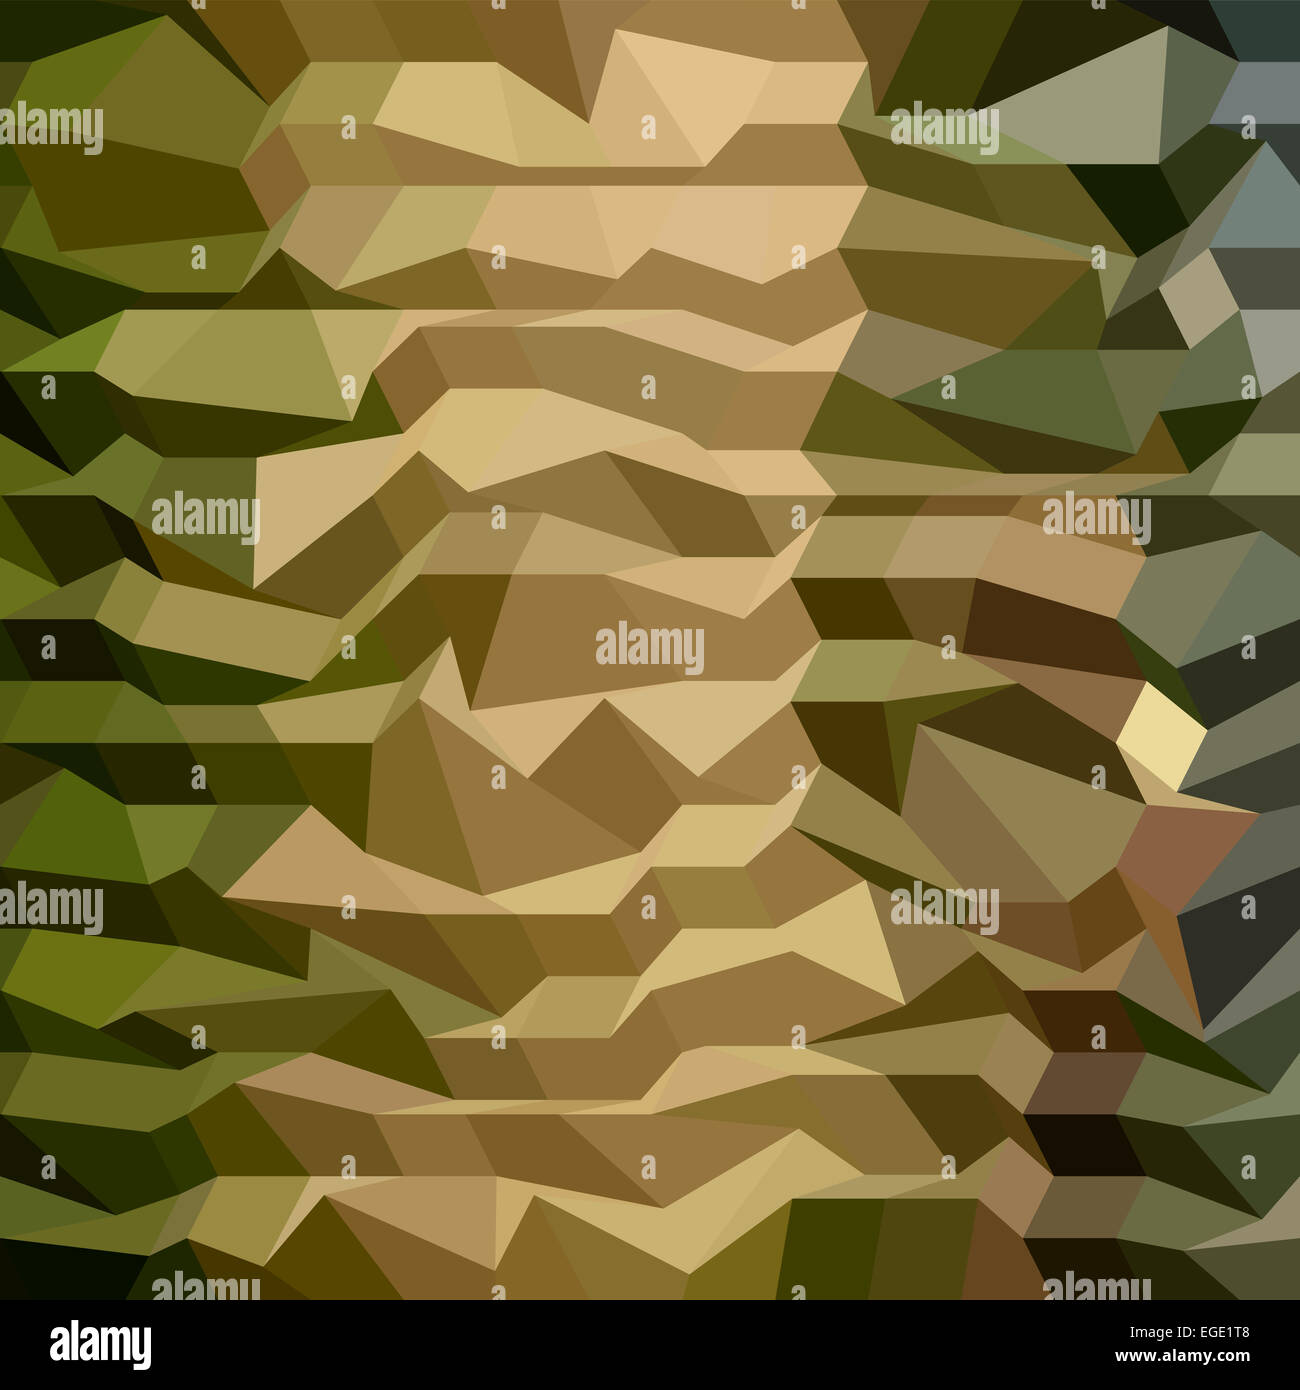 Low polygon style illustration of a camouflage abstract background. Stock Photo